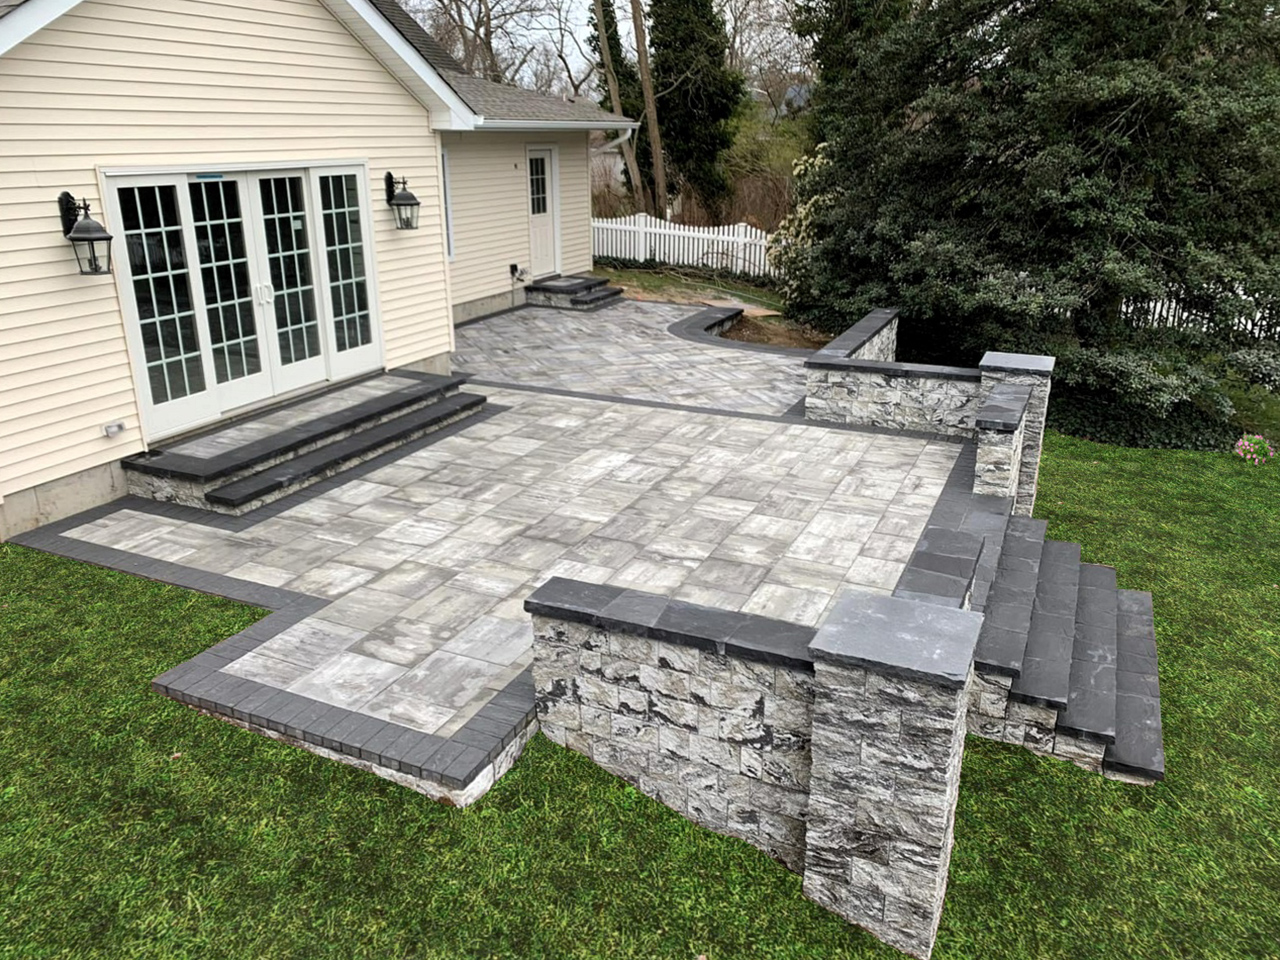 Natural stone steps that enhance accessibility and comfort when moving around the outdoor area